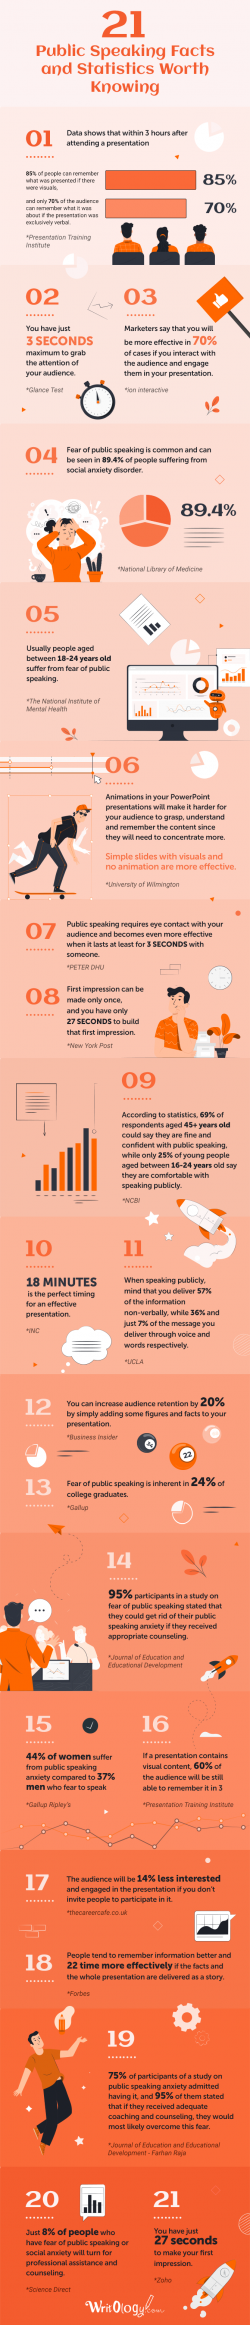 21 Public Speaking Facts and Statistics Worth Knowing